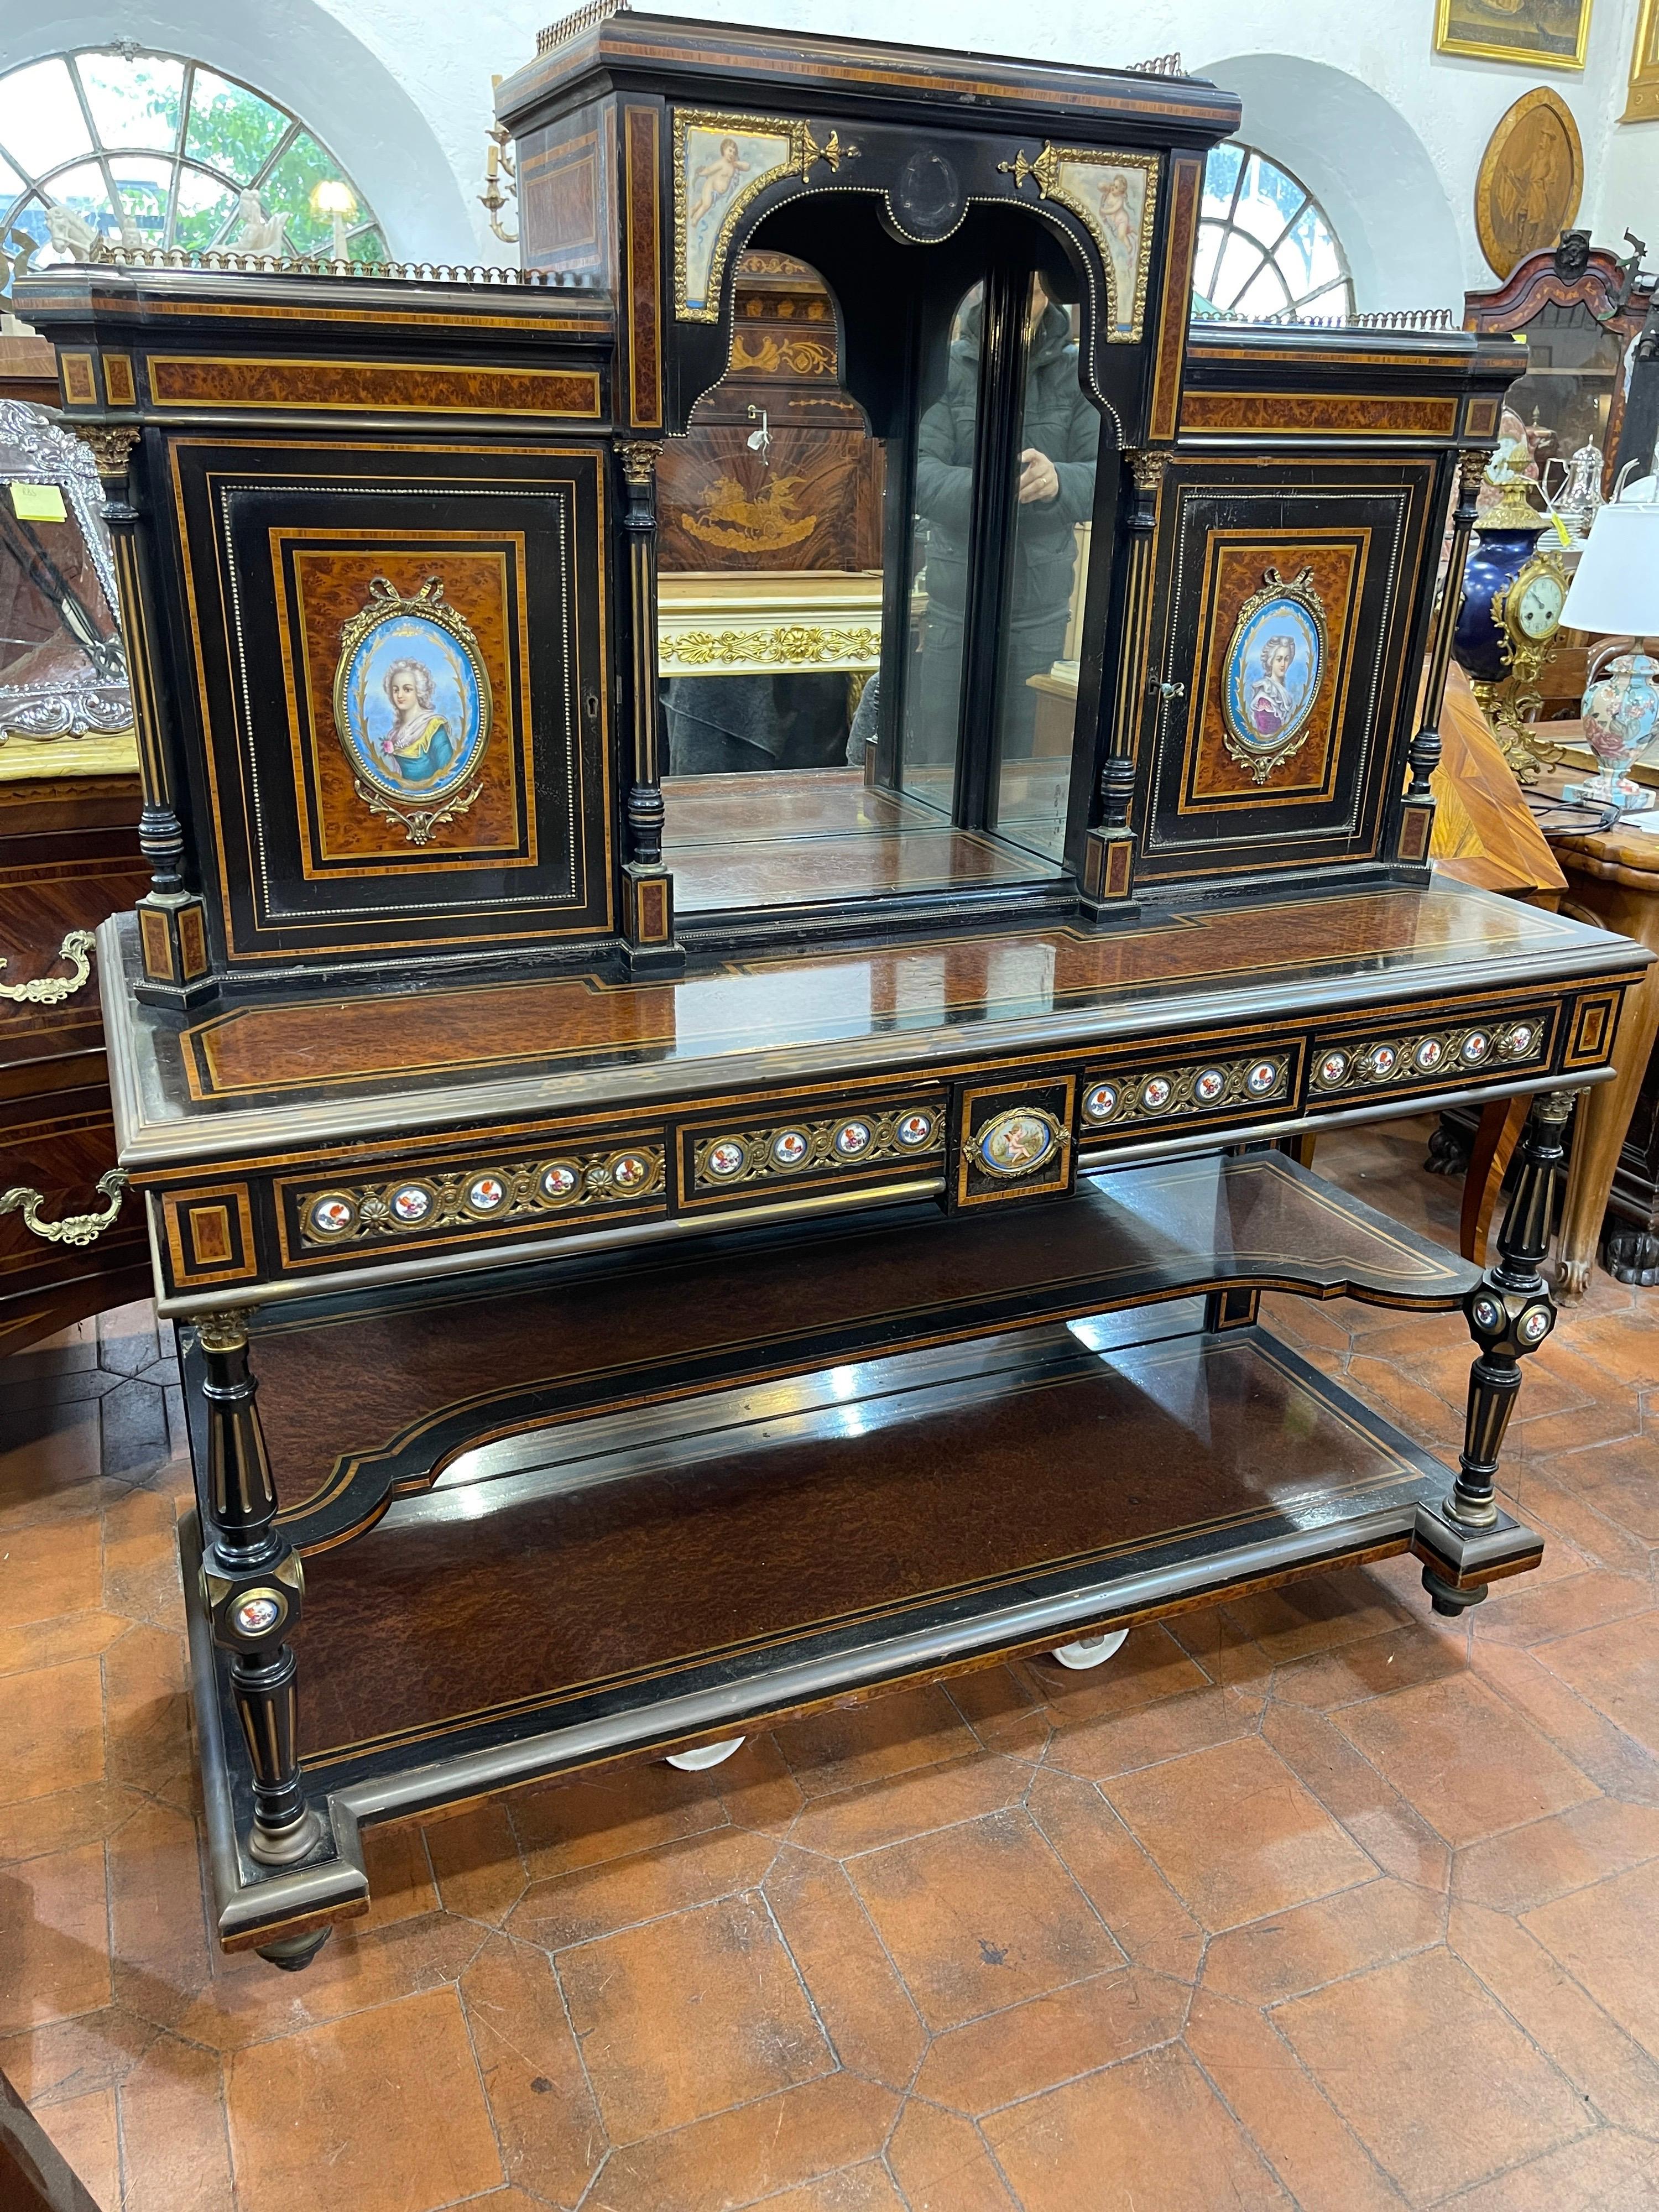 Antique Victorian Bonheur Du Jour, imposing piece of furniture from the Victorian era.
 In Amboyna and Thuya wood, with hand painted Sevres porcelain plaques. 
A porcelain plate is missing from the top. The cabinet once chosen will be carefully